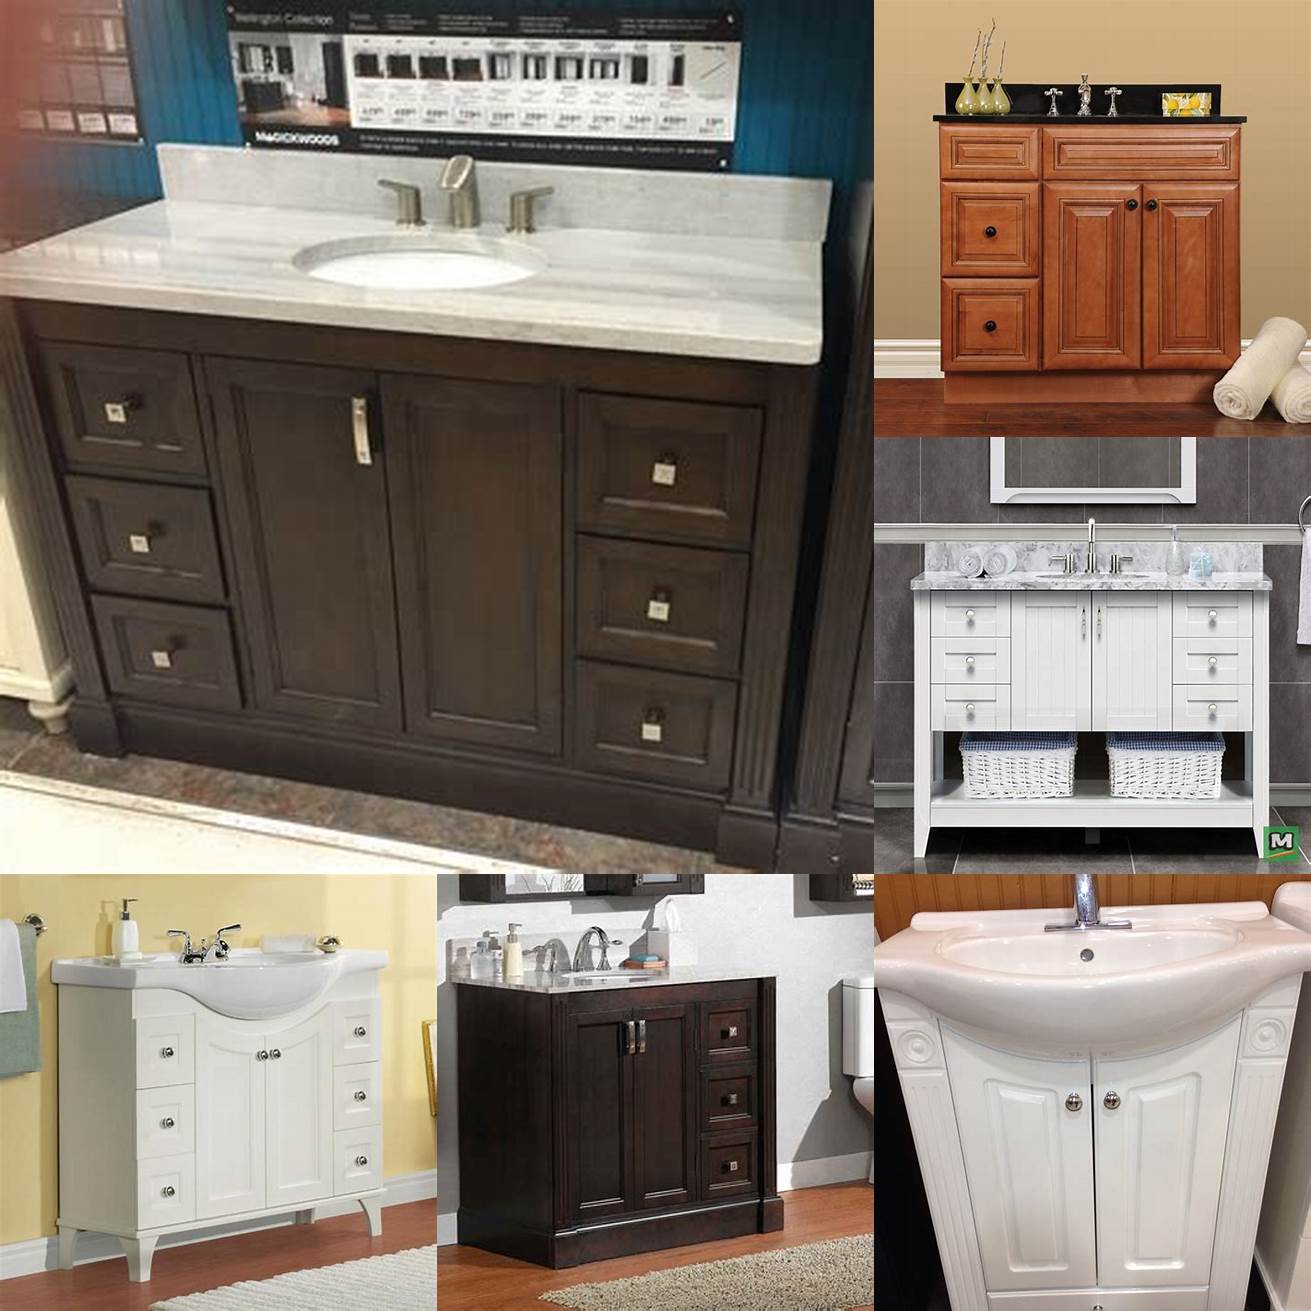 Affordable prices Menards vanities are reasonably priced making them an excellent choice for budget-conscious homeowners